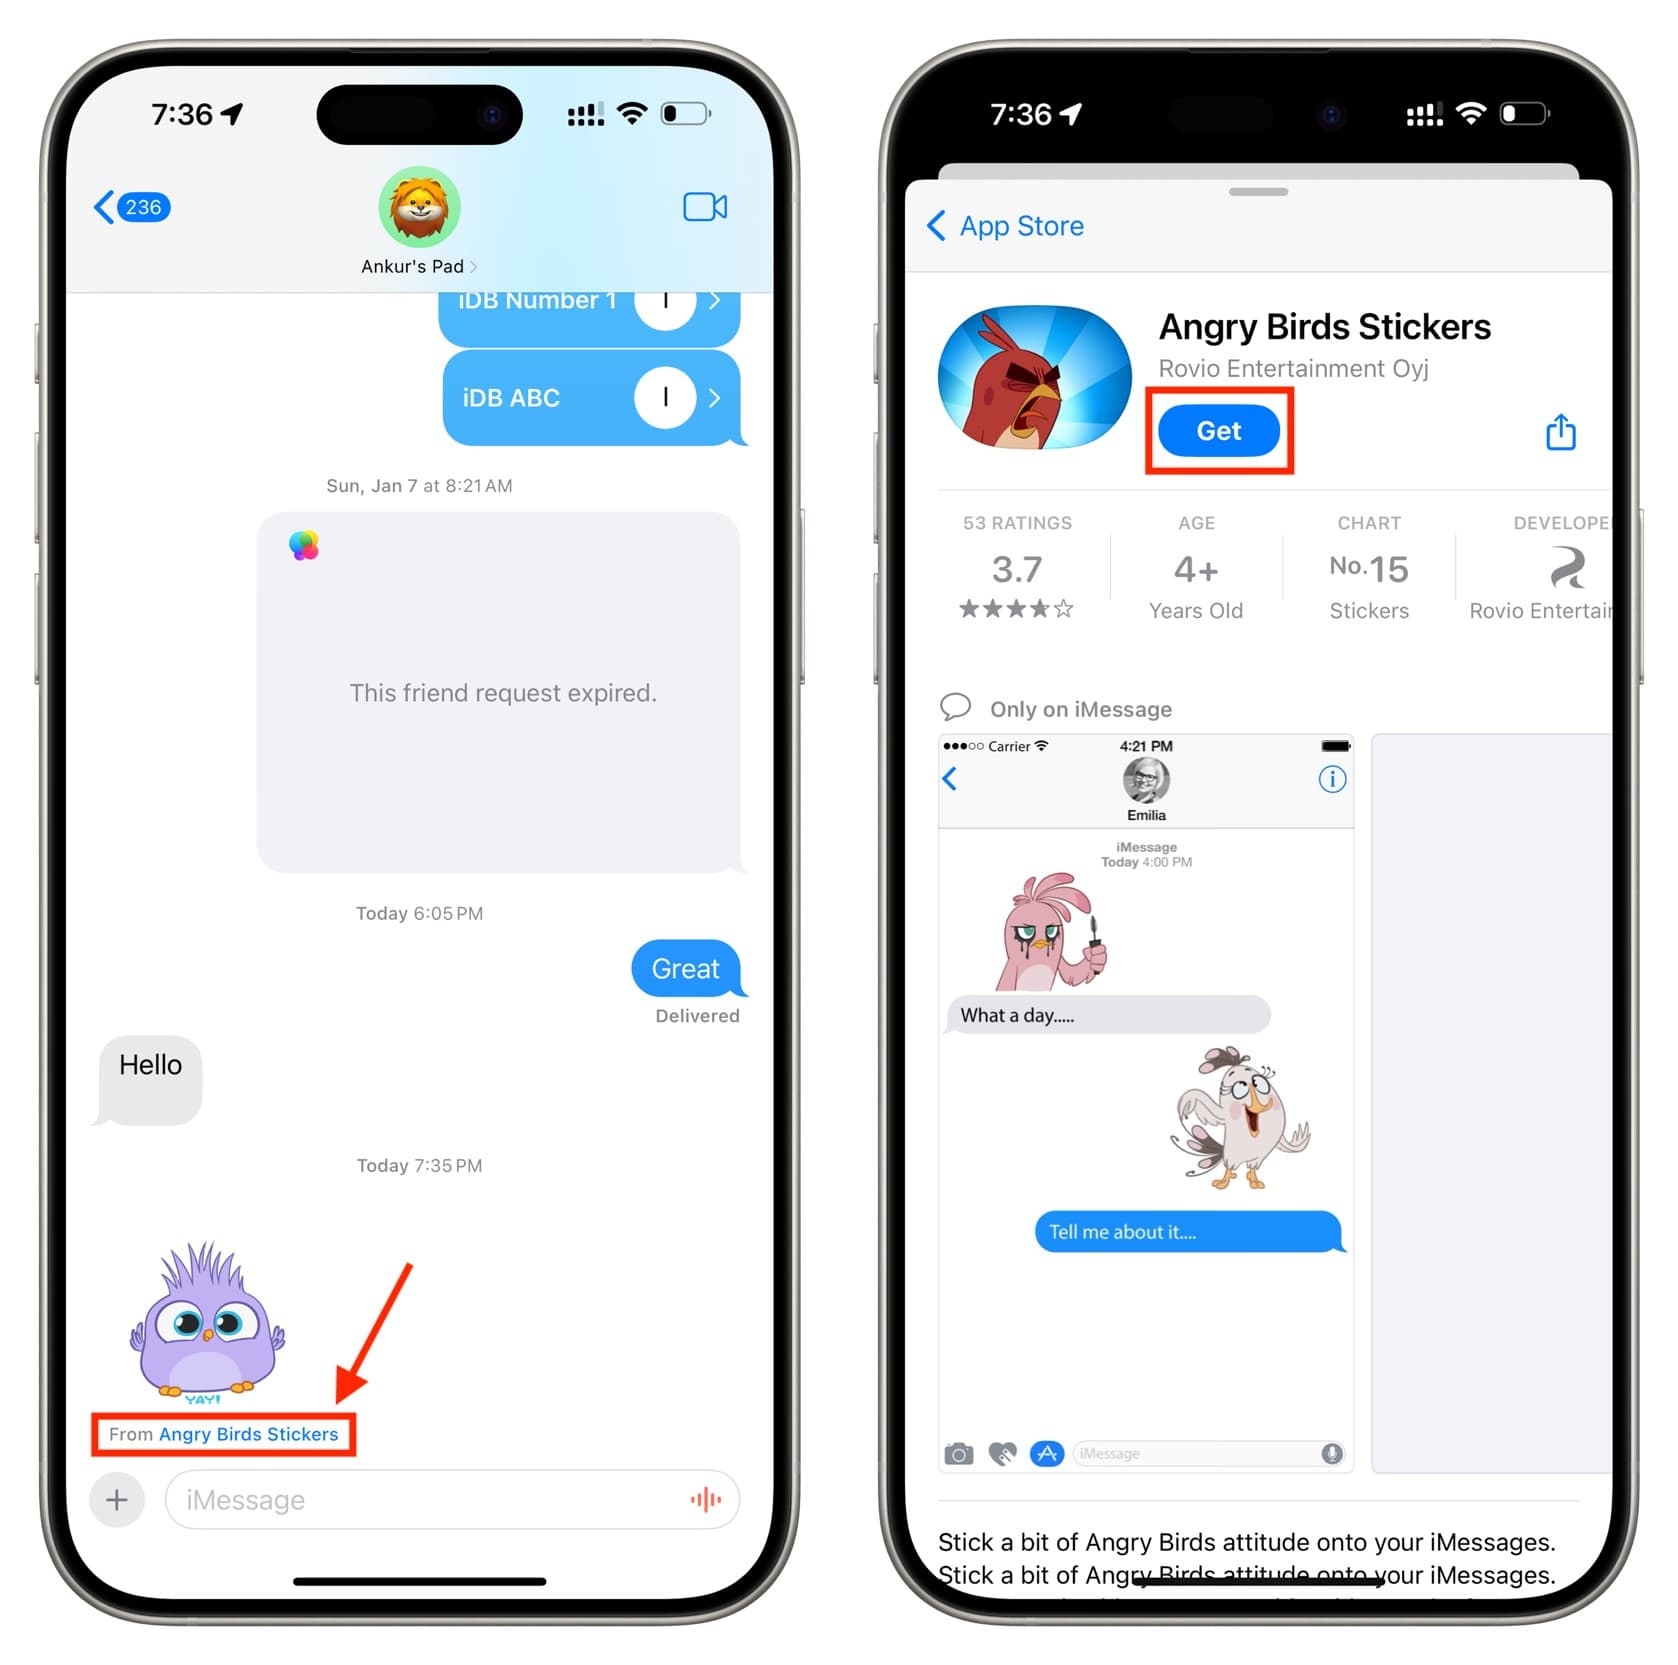 Download sticker your friend uses on your iPhone